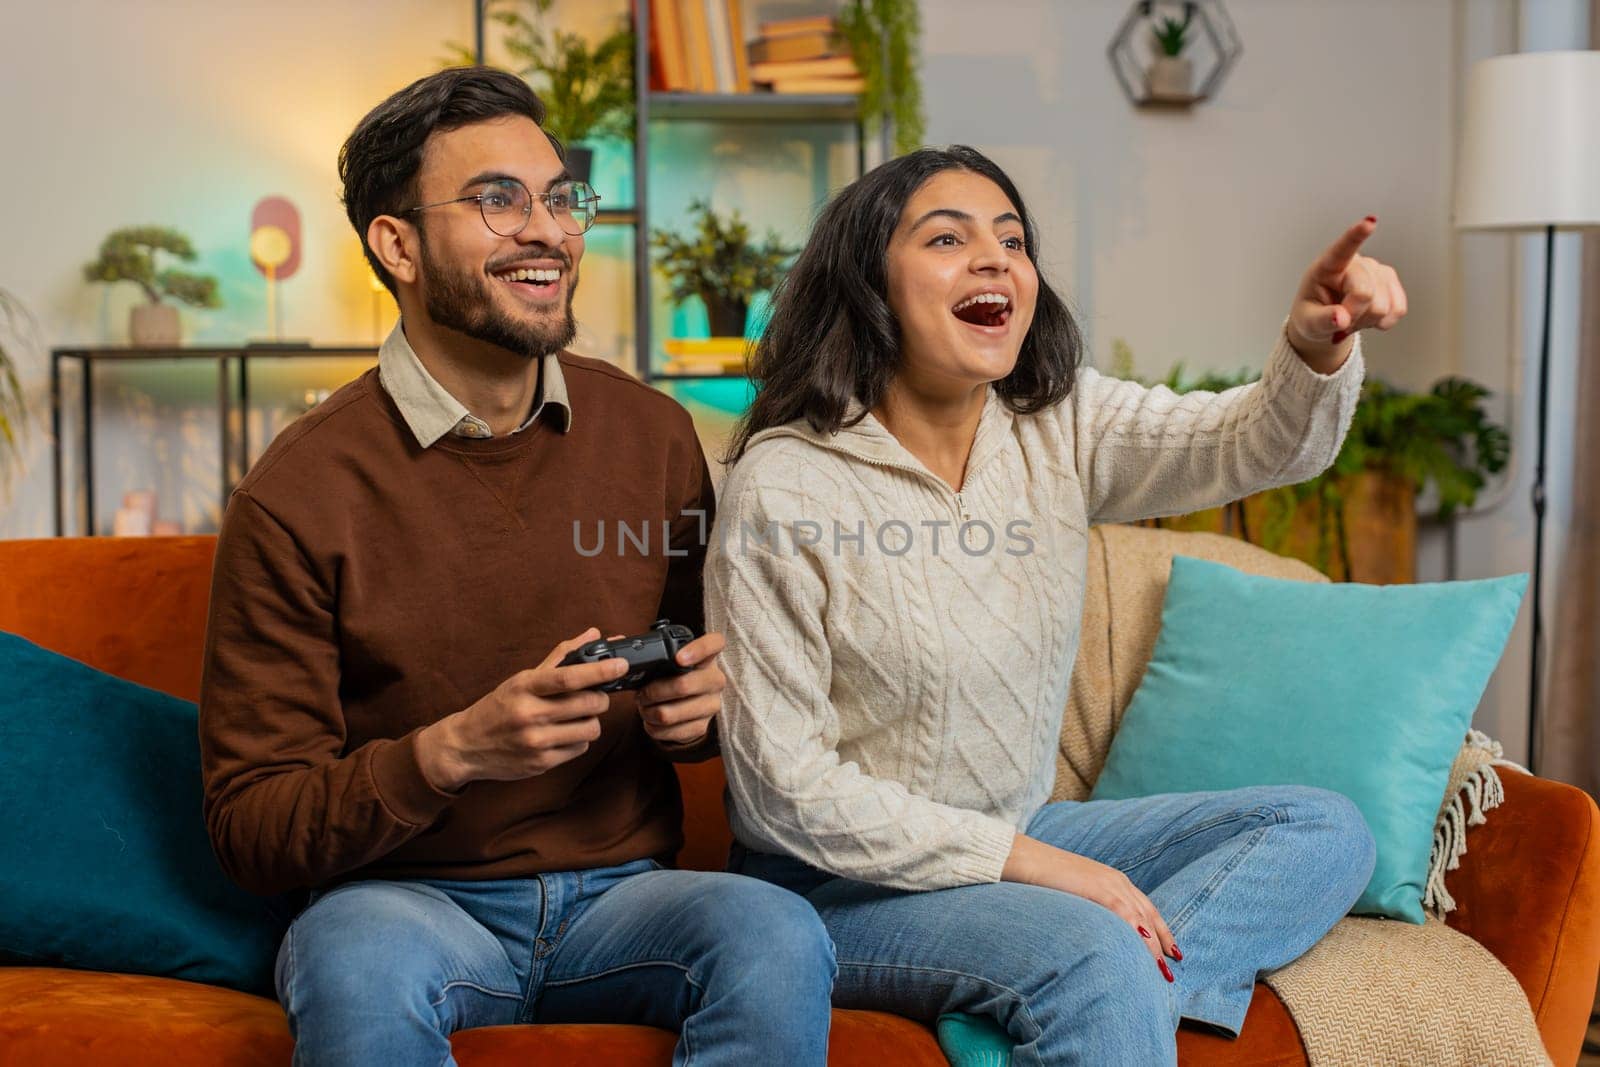 Cheerful young Indian couple using joystick controller playing video game fun enjoying sitting on sofa in living room. Diverse family enjoying success winning online game during weekend in house